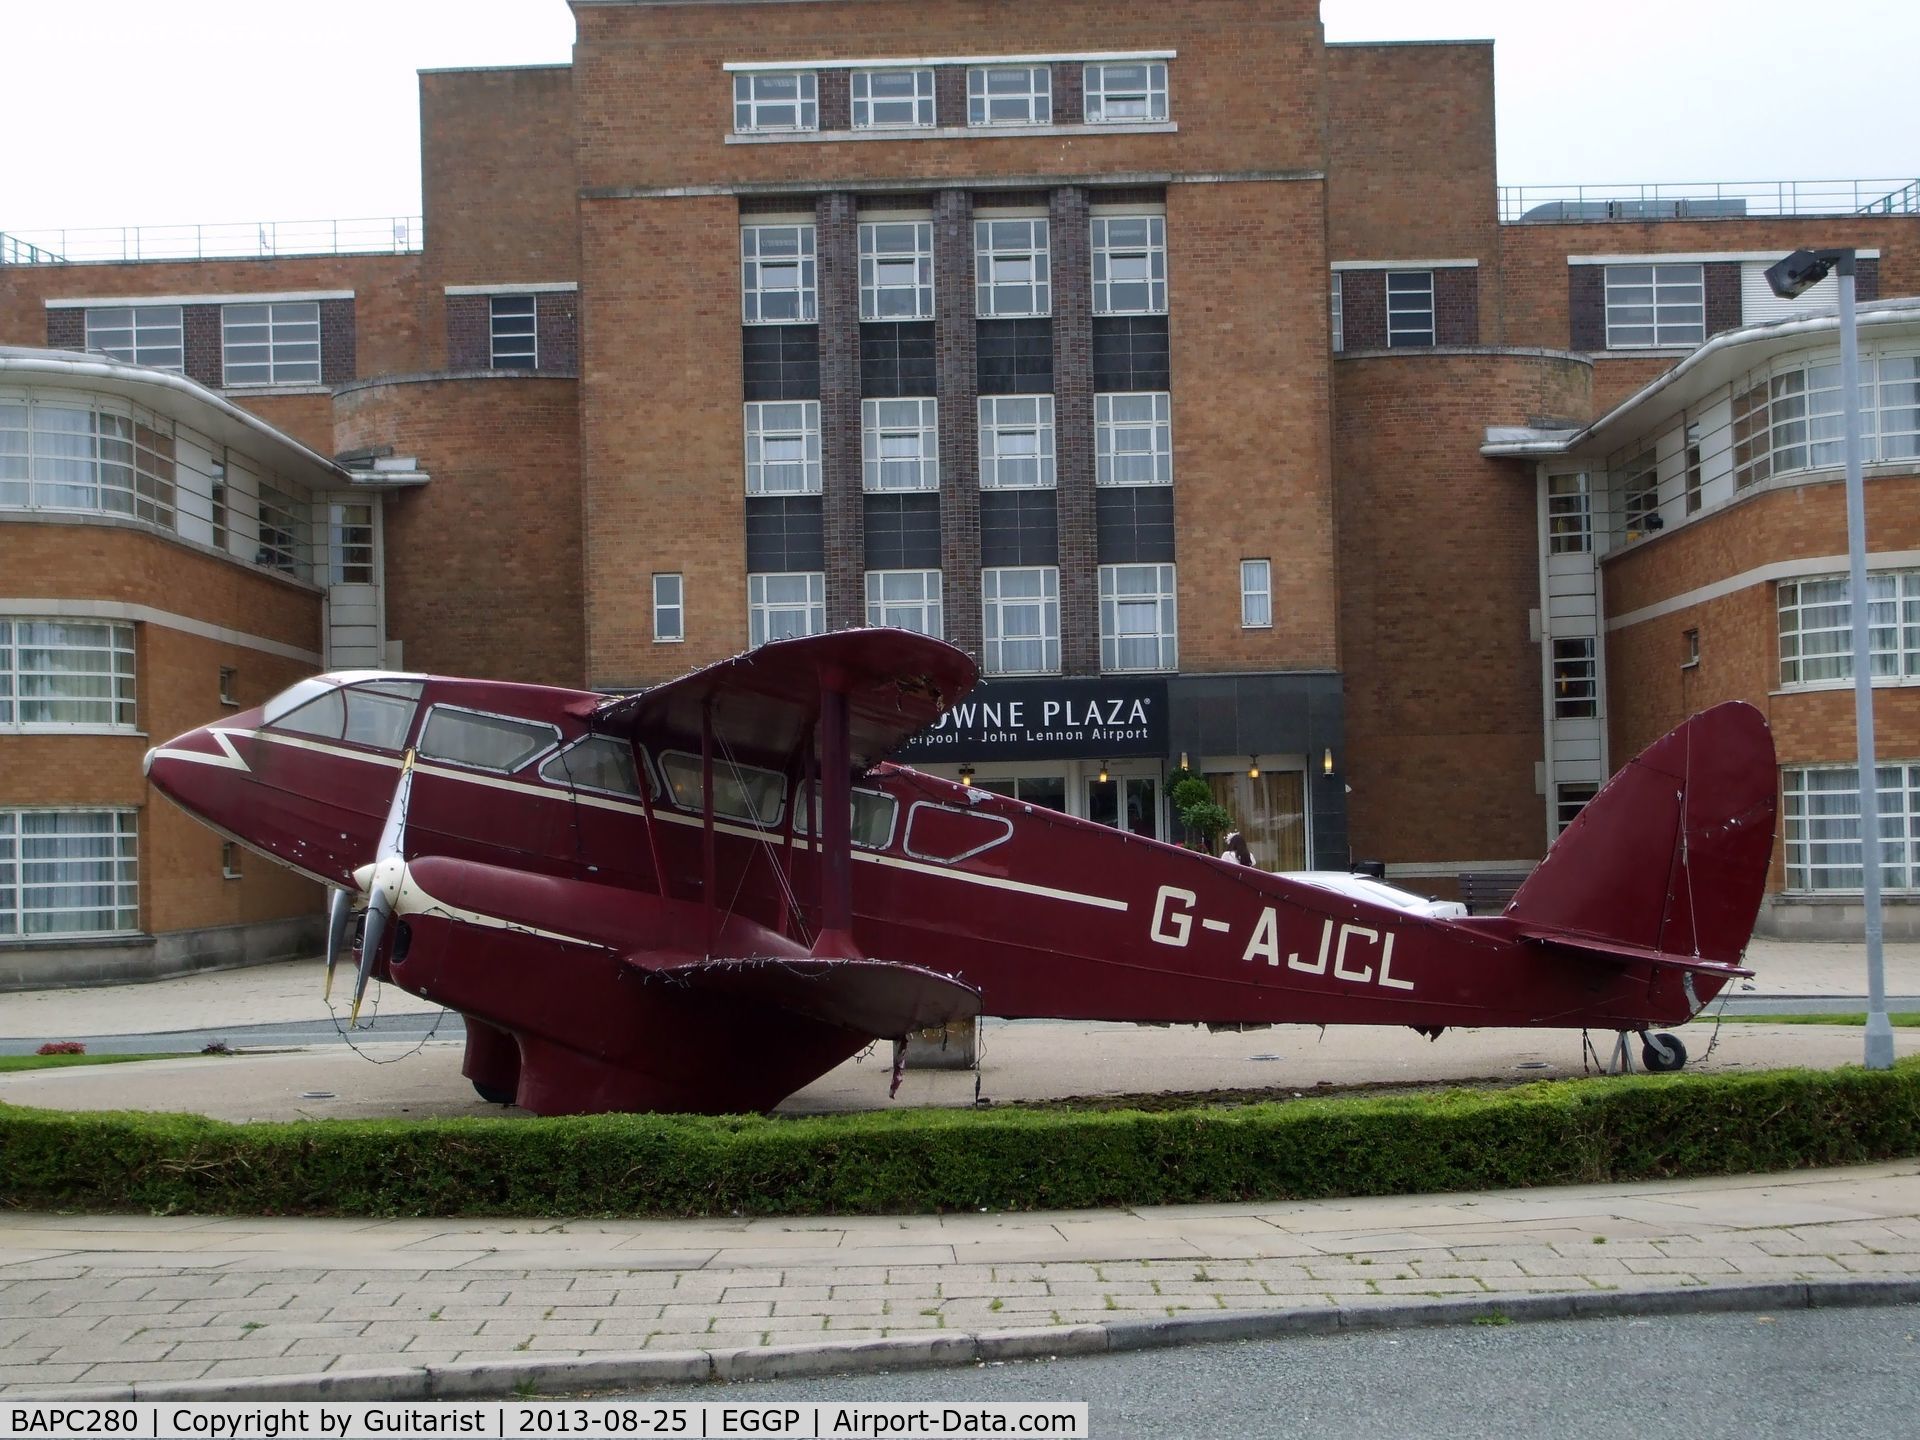 BAPC280, 1944 De Havilland DH-89A Rapide Replica C/N BAPC280, This replica Dragon Rapide is outside the entrance to the Crowne Plaza hotel situated in the old terminal building at Liverpool Airport.